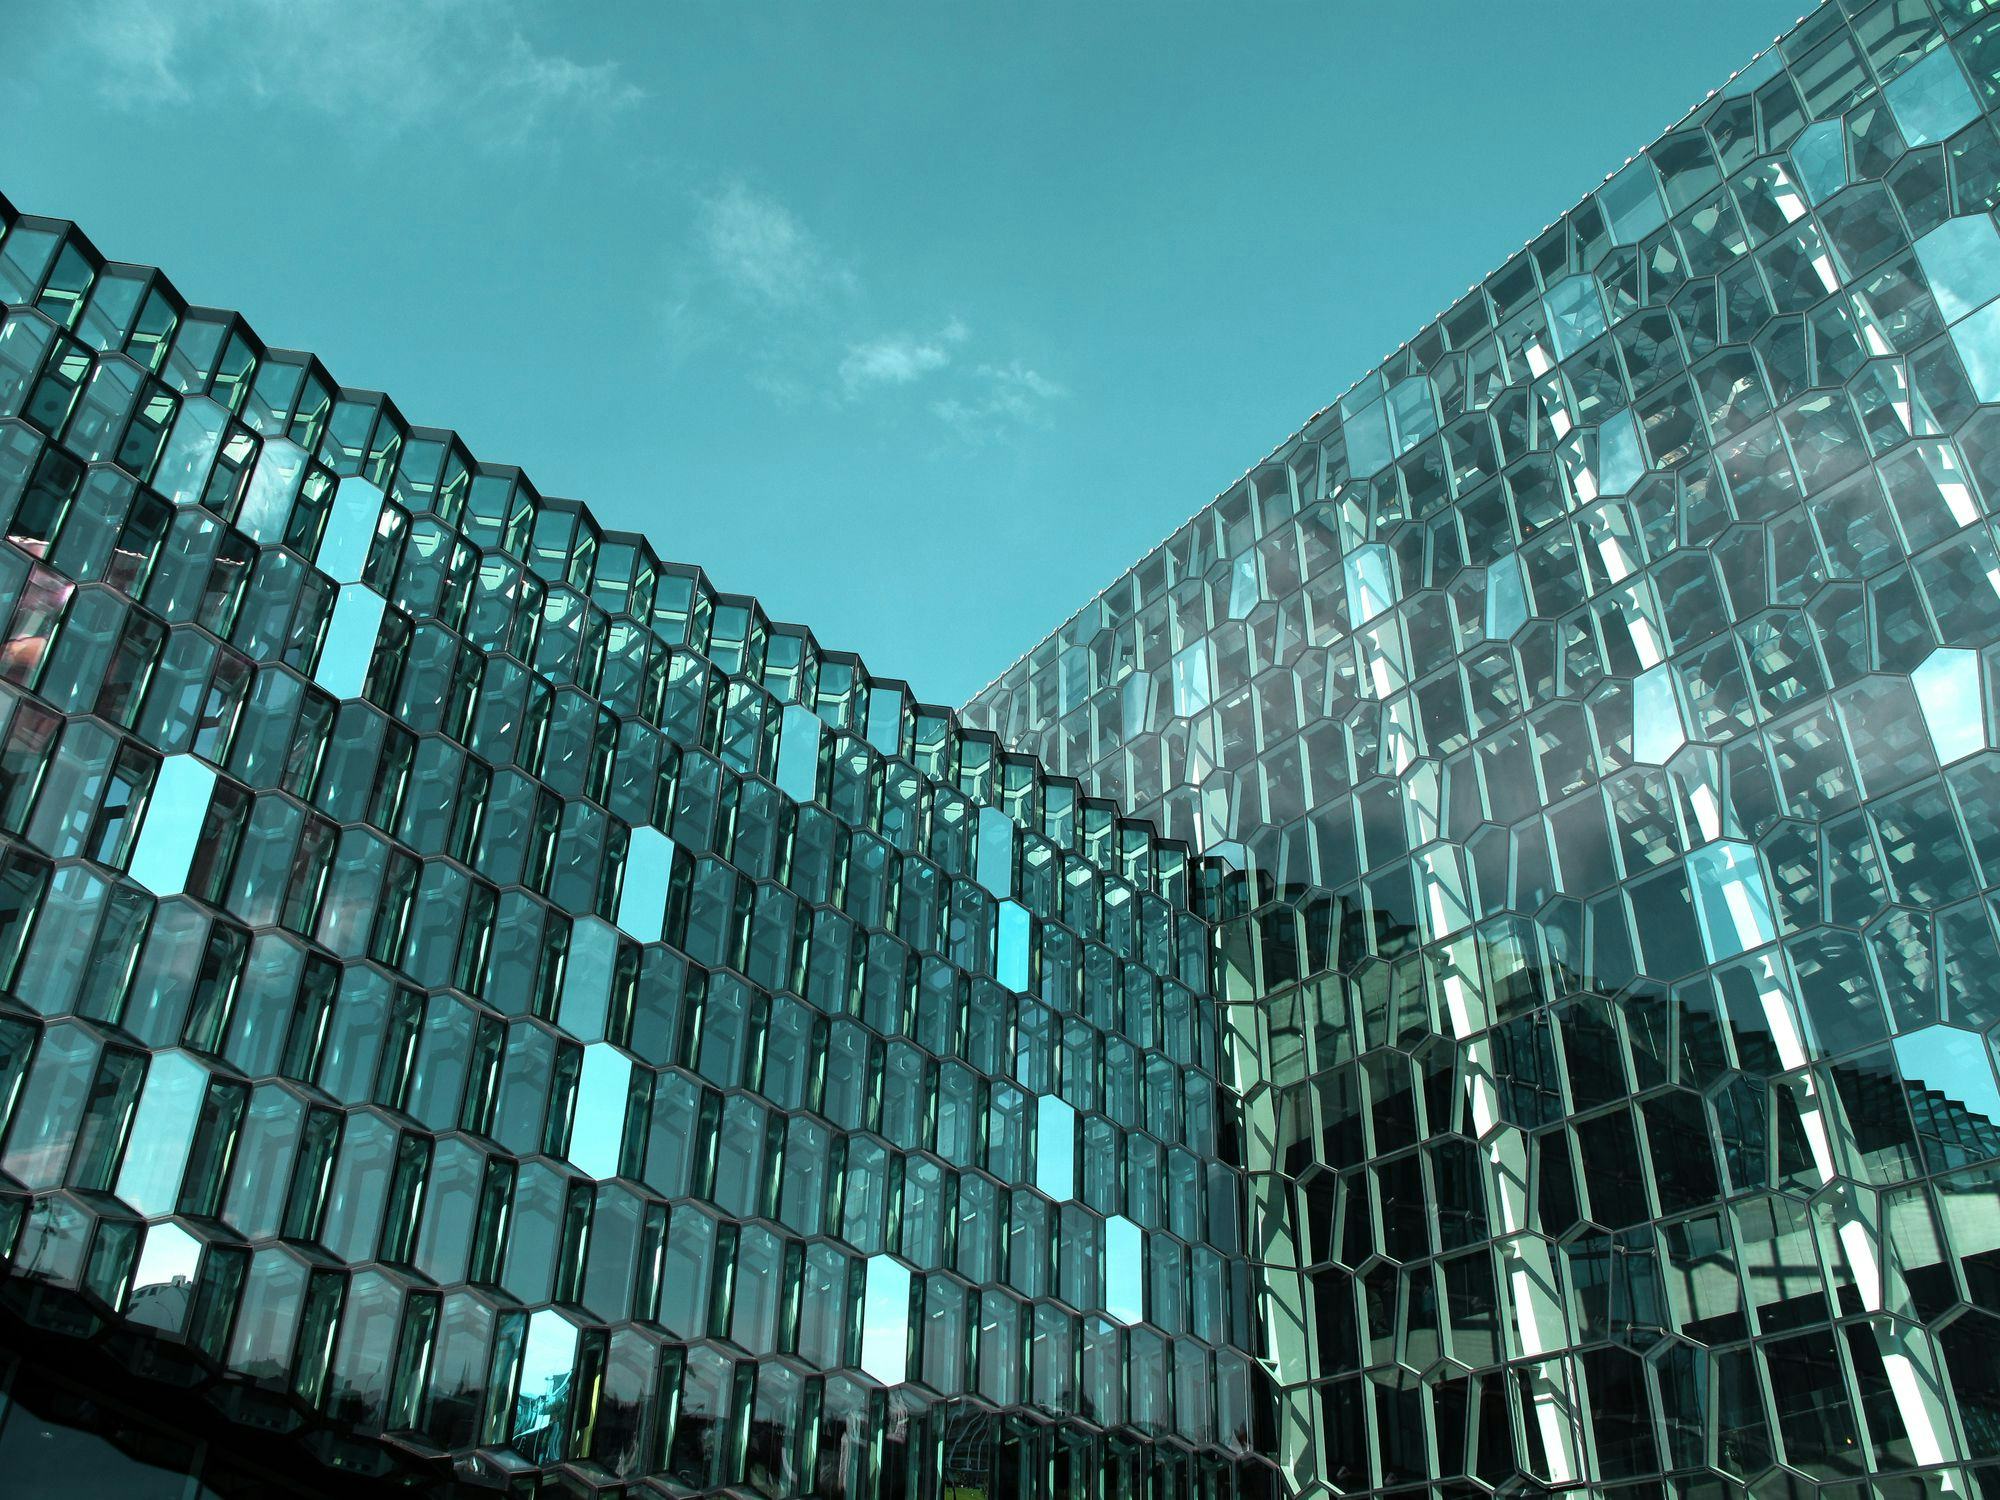 Image of Harpa Concert hall walls with sky in the background